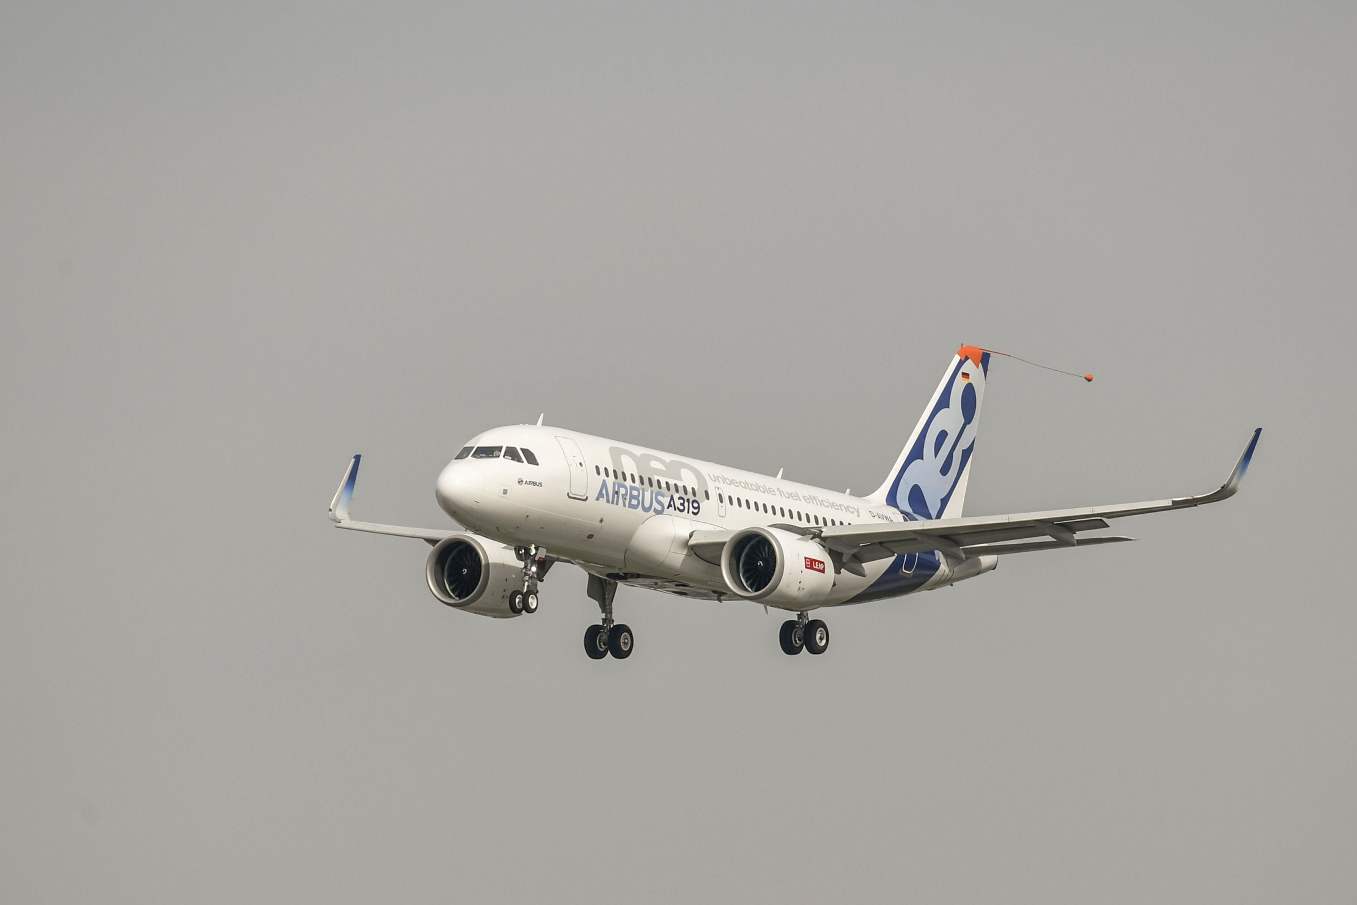 Certification for LEAP-powered Airbus A319neo